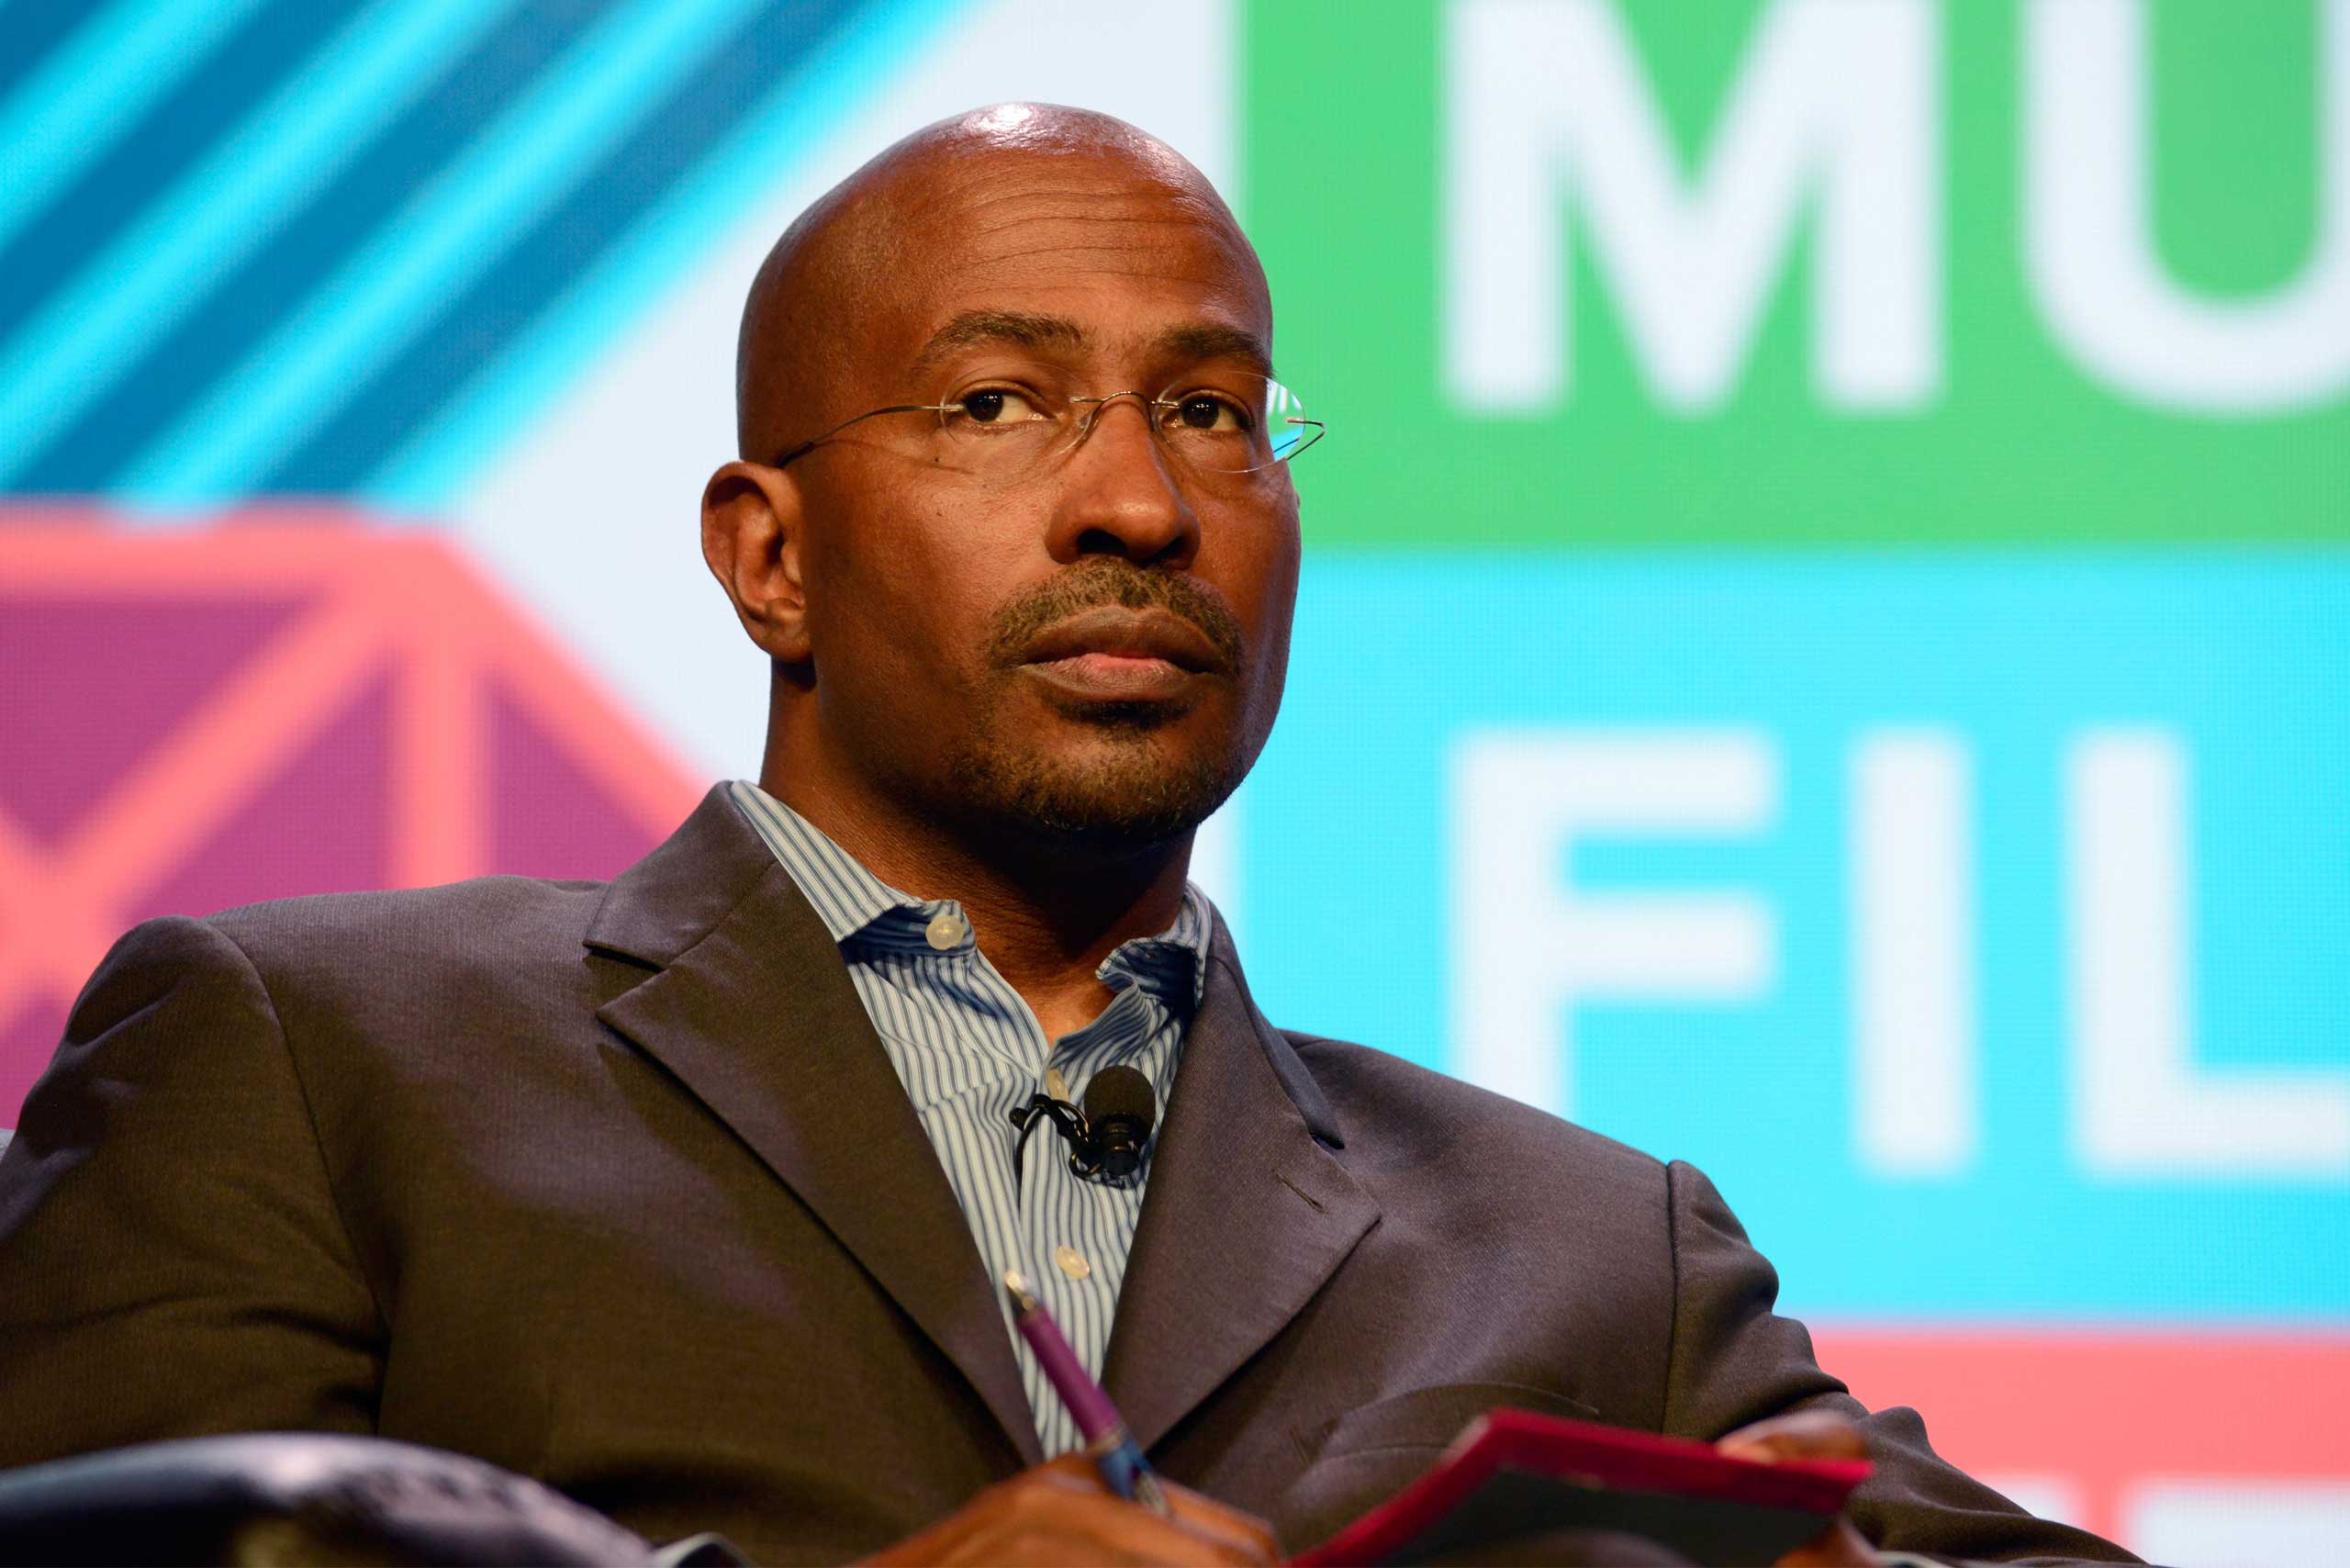 Civil rights activist Van Jones speaks onstage at '#YesWeCode: From The 'Hood To Silicon Valley' during the 2015 SXSW Music, Film + Interactive Festival at Austin Convention Center in Austin on March 16, 2015.